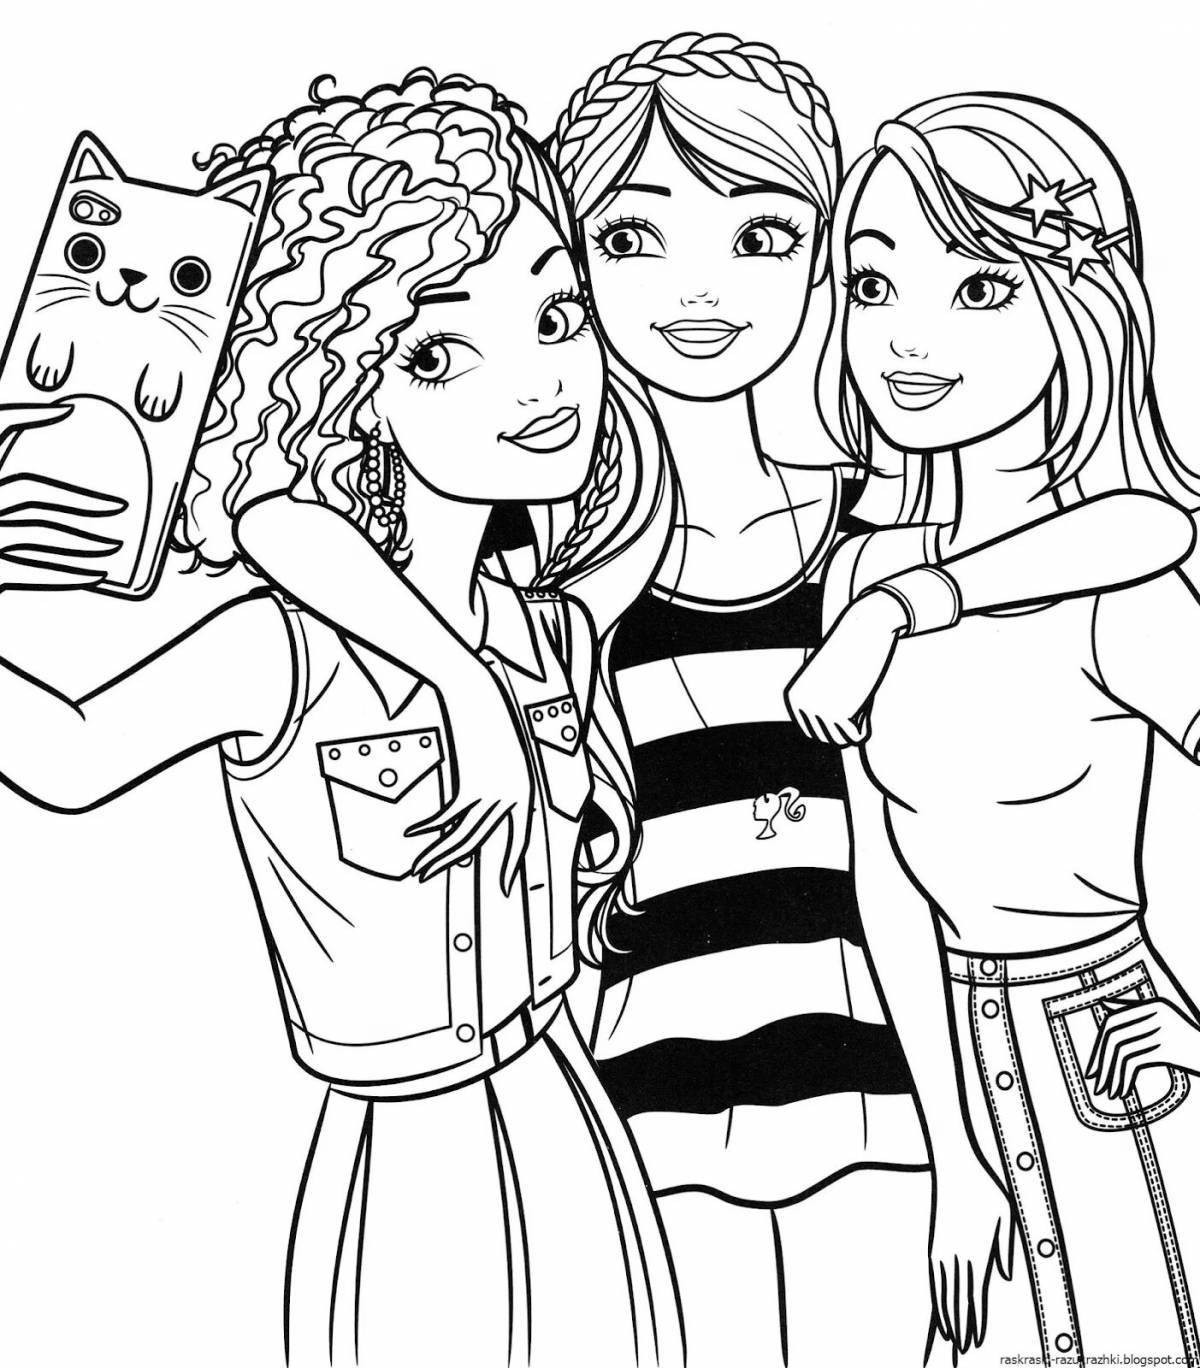 Entertaining coloring book for girls 10 years old